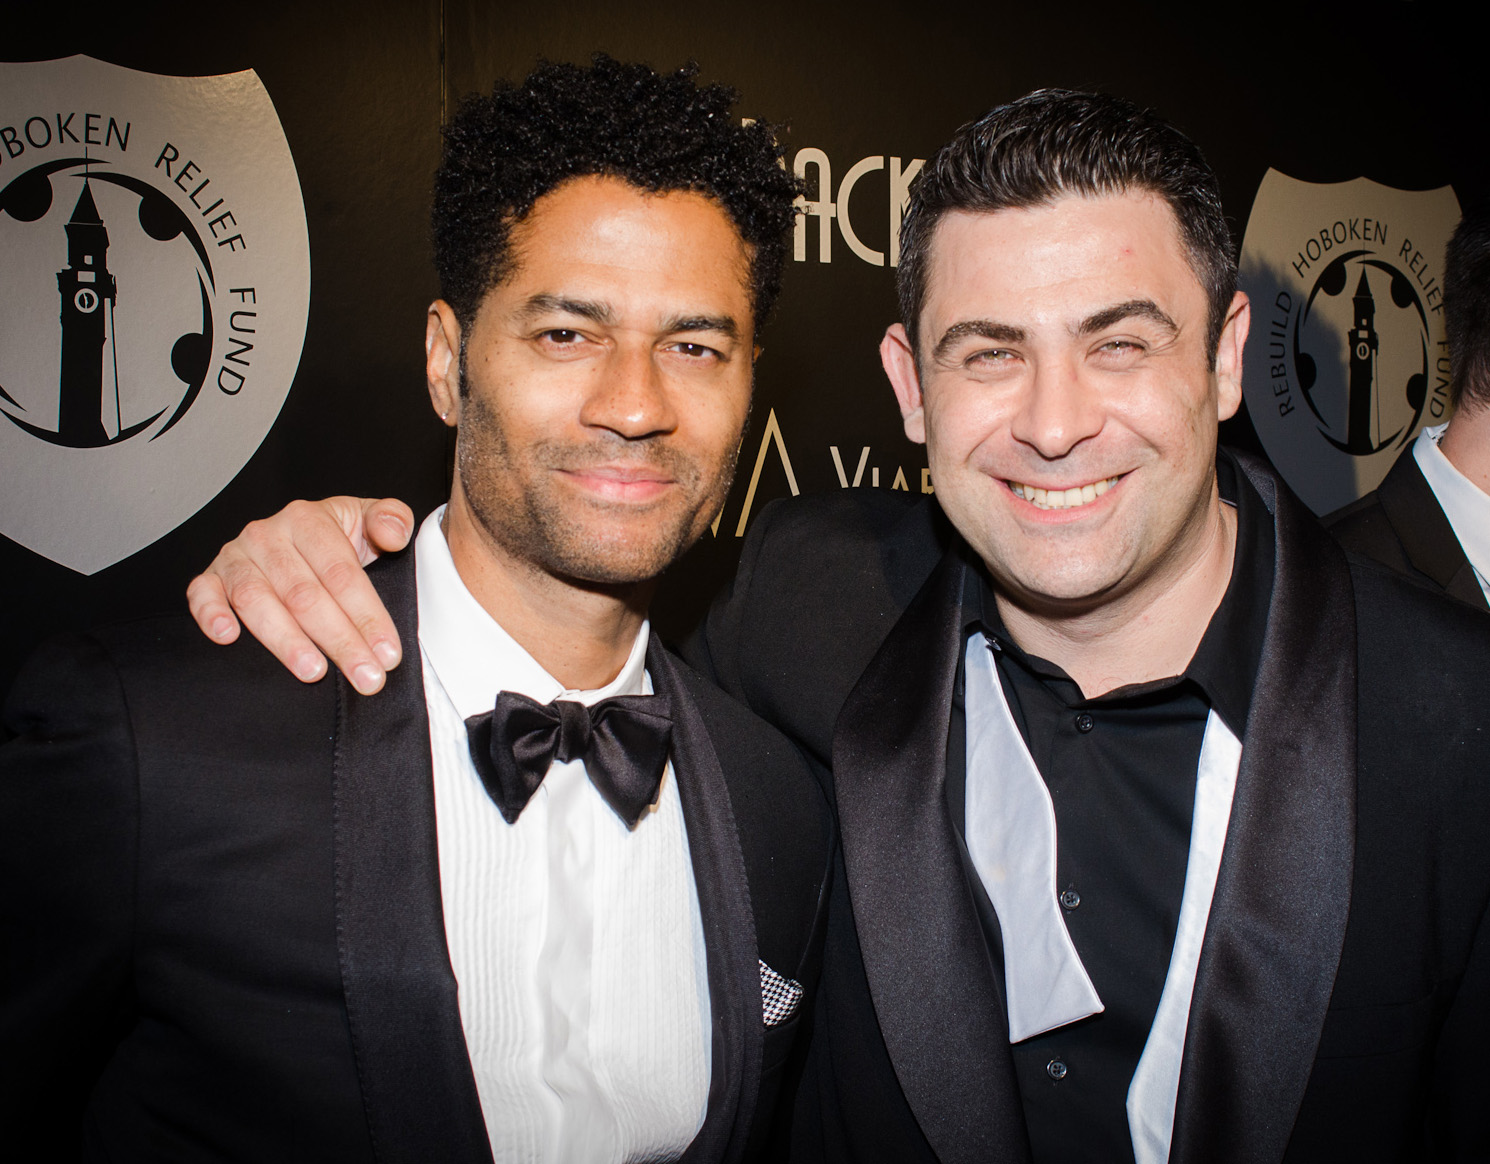 Phil VIardo with Eric Benet at the arrivals of the 7th Annual Rat Pack Ball, benefiting Rebuild Hoboken Relief Fund, presented by Viardo Artists